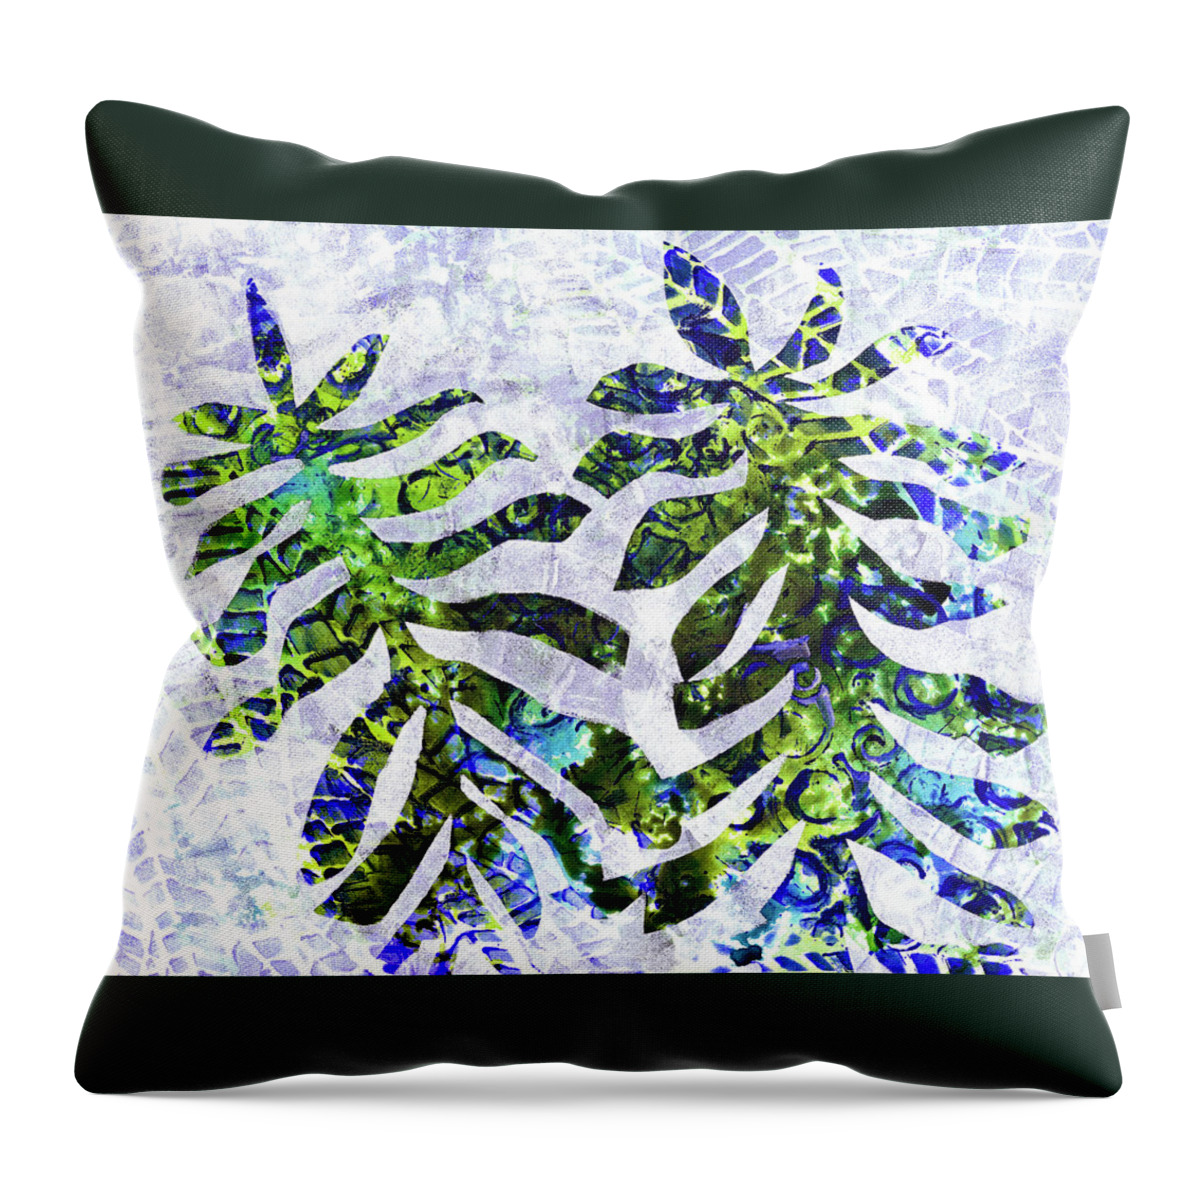 Tropical Throw Pillow featuring the painting Calico Succulents by Cynthia Fletcher